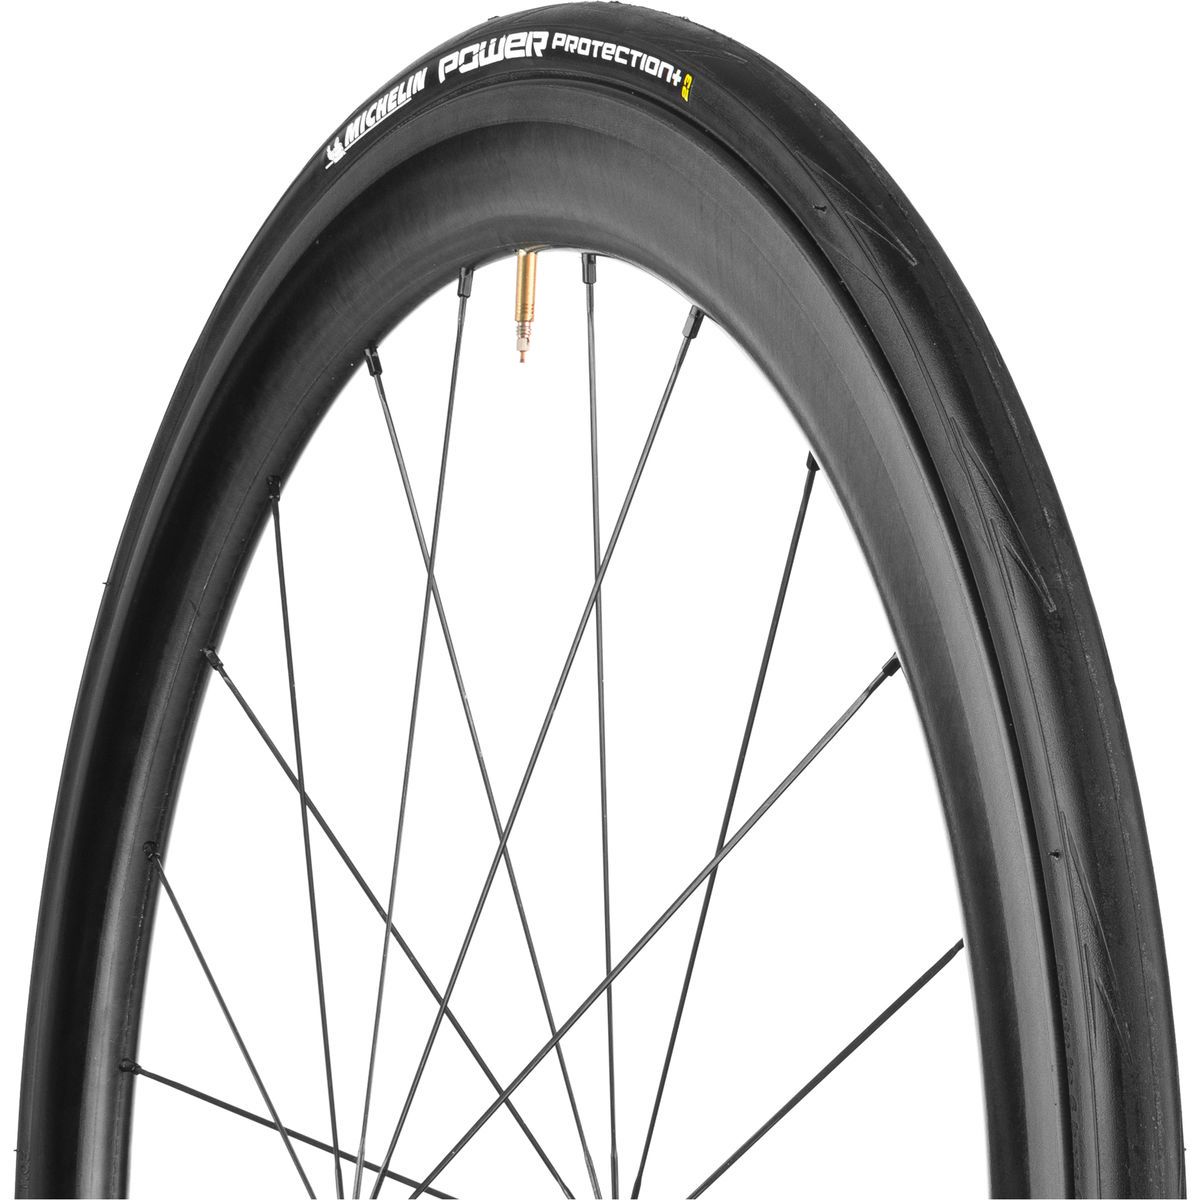 Michelin Power Protection + Tire - Clincher